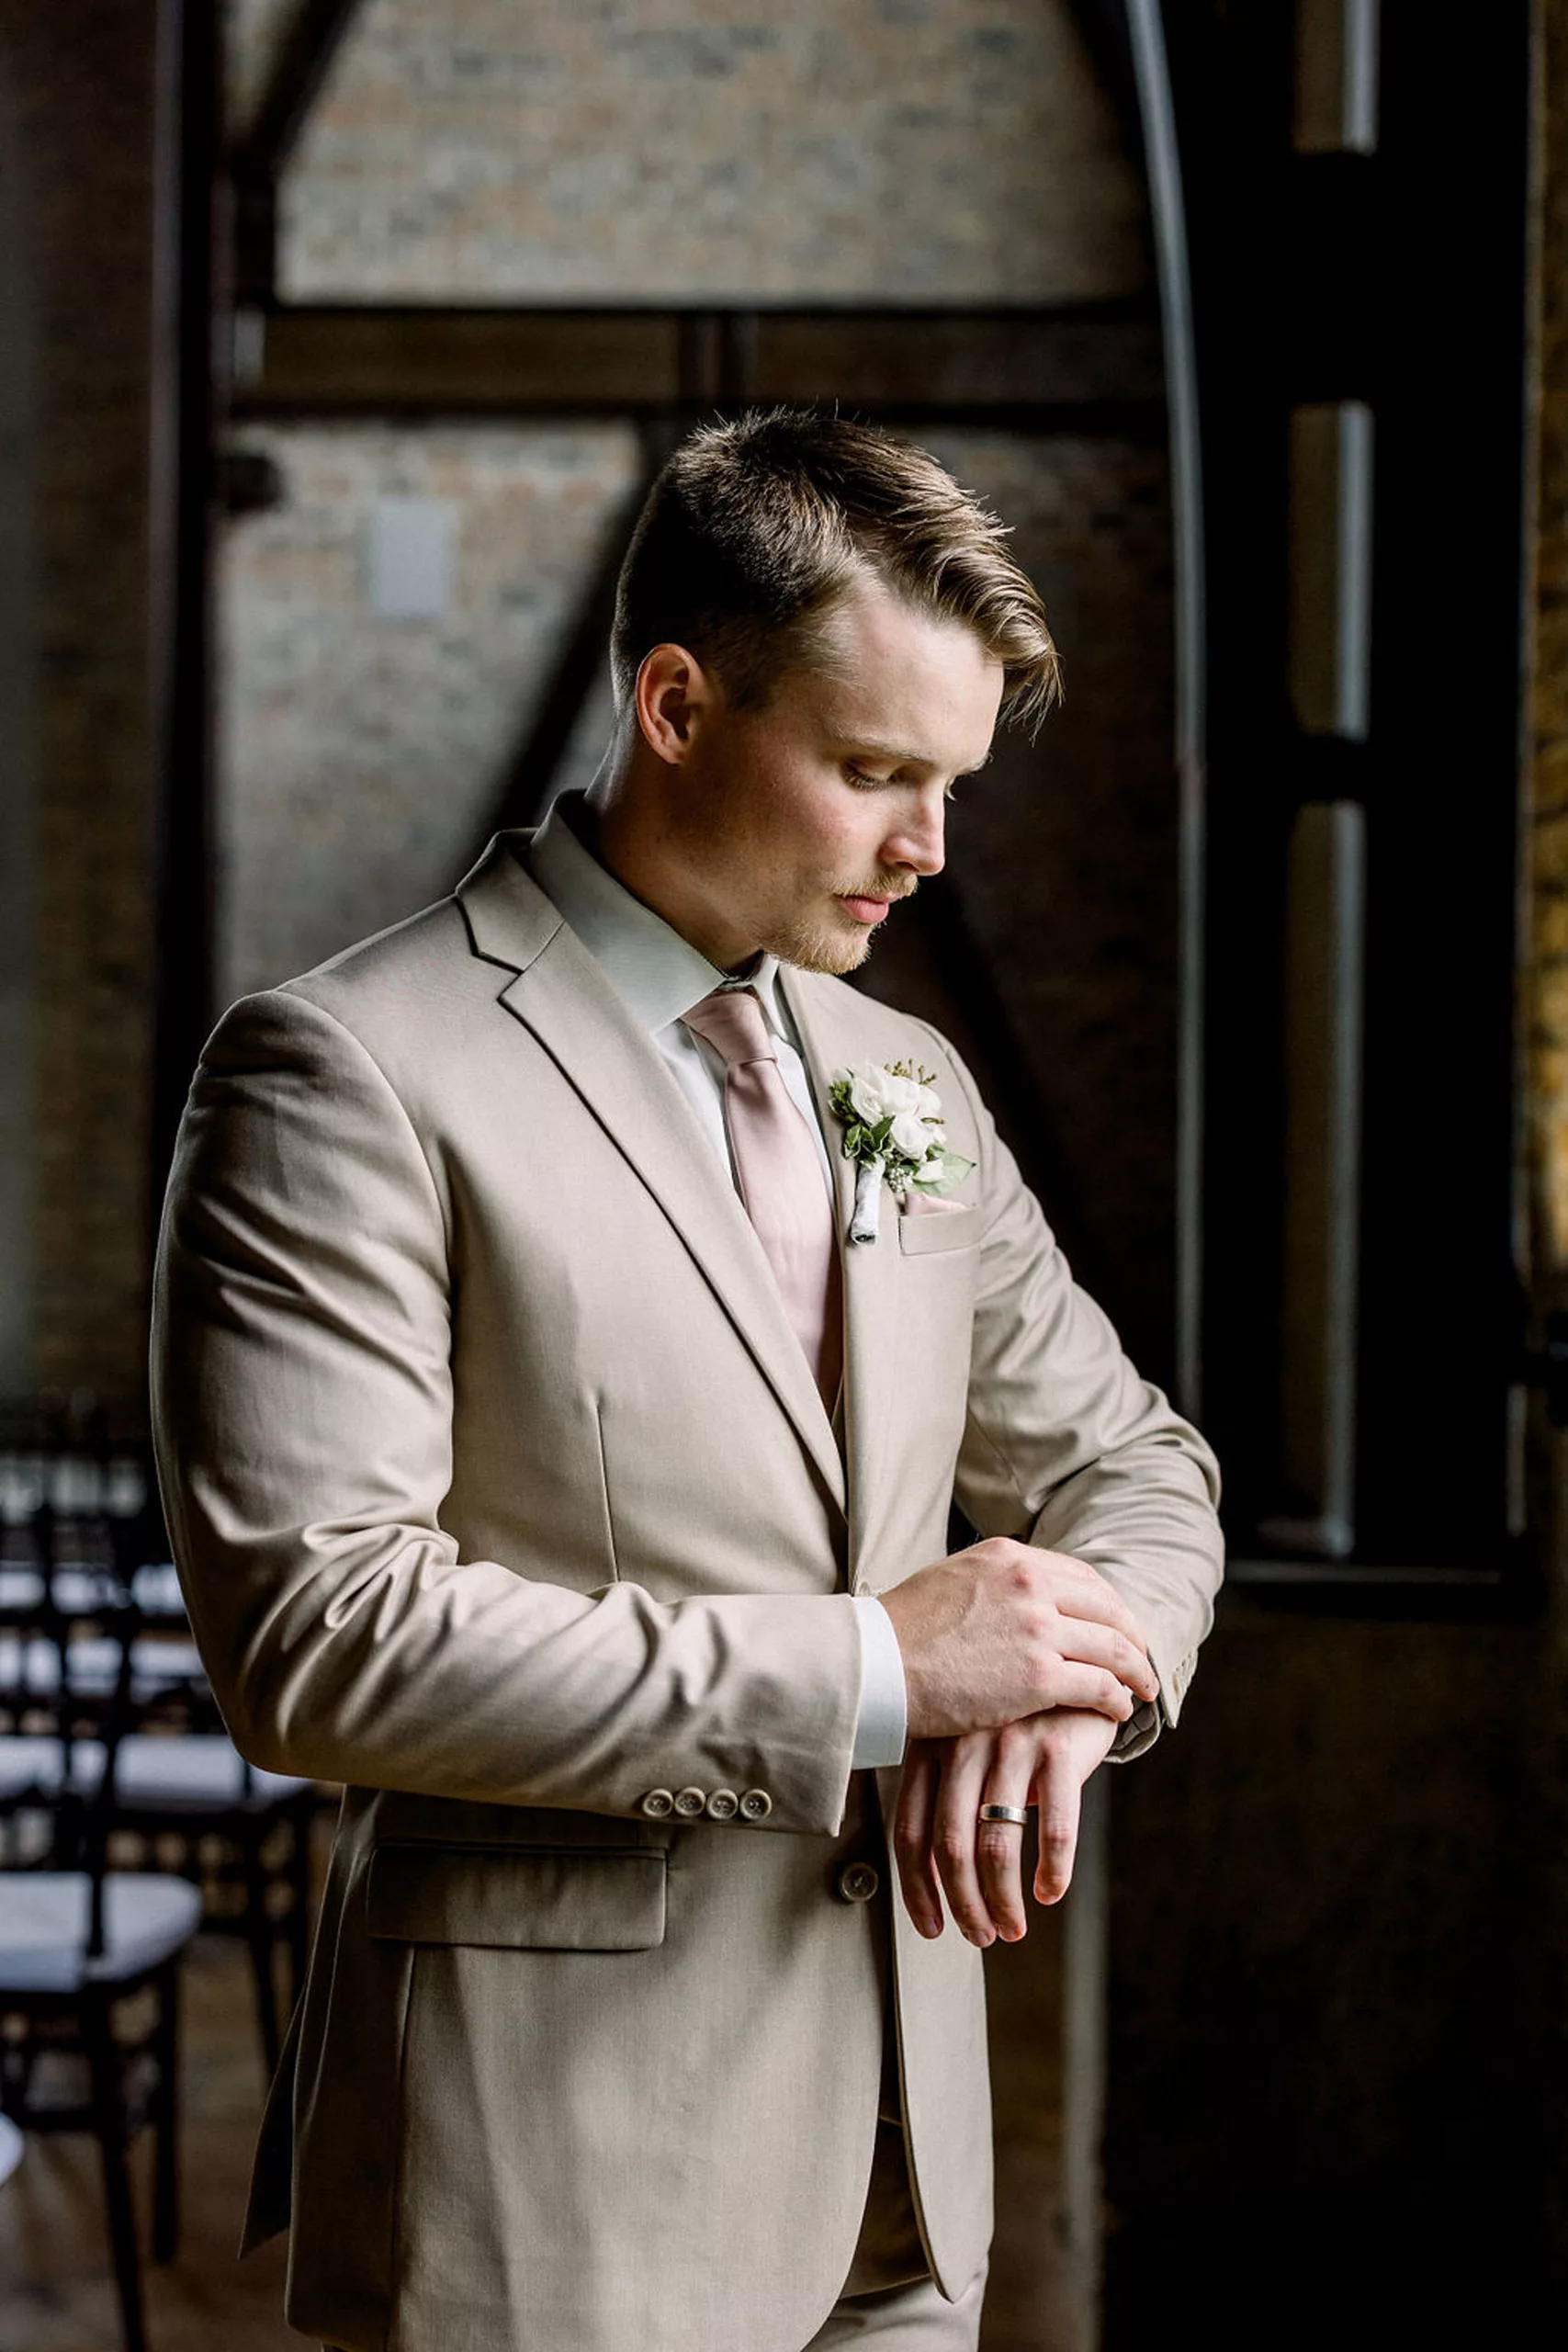 A groom checks his watch in a beige suit and pink tie in a window before his iron manor wedding